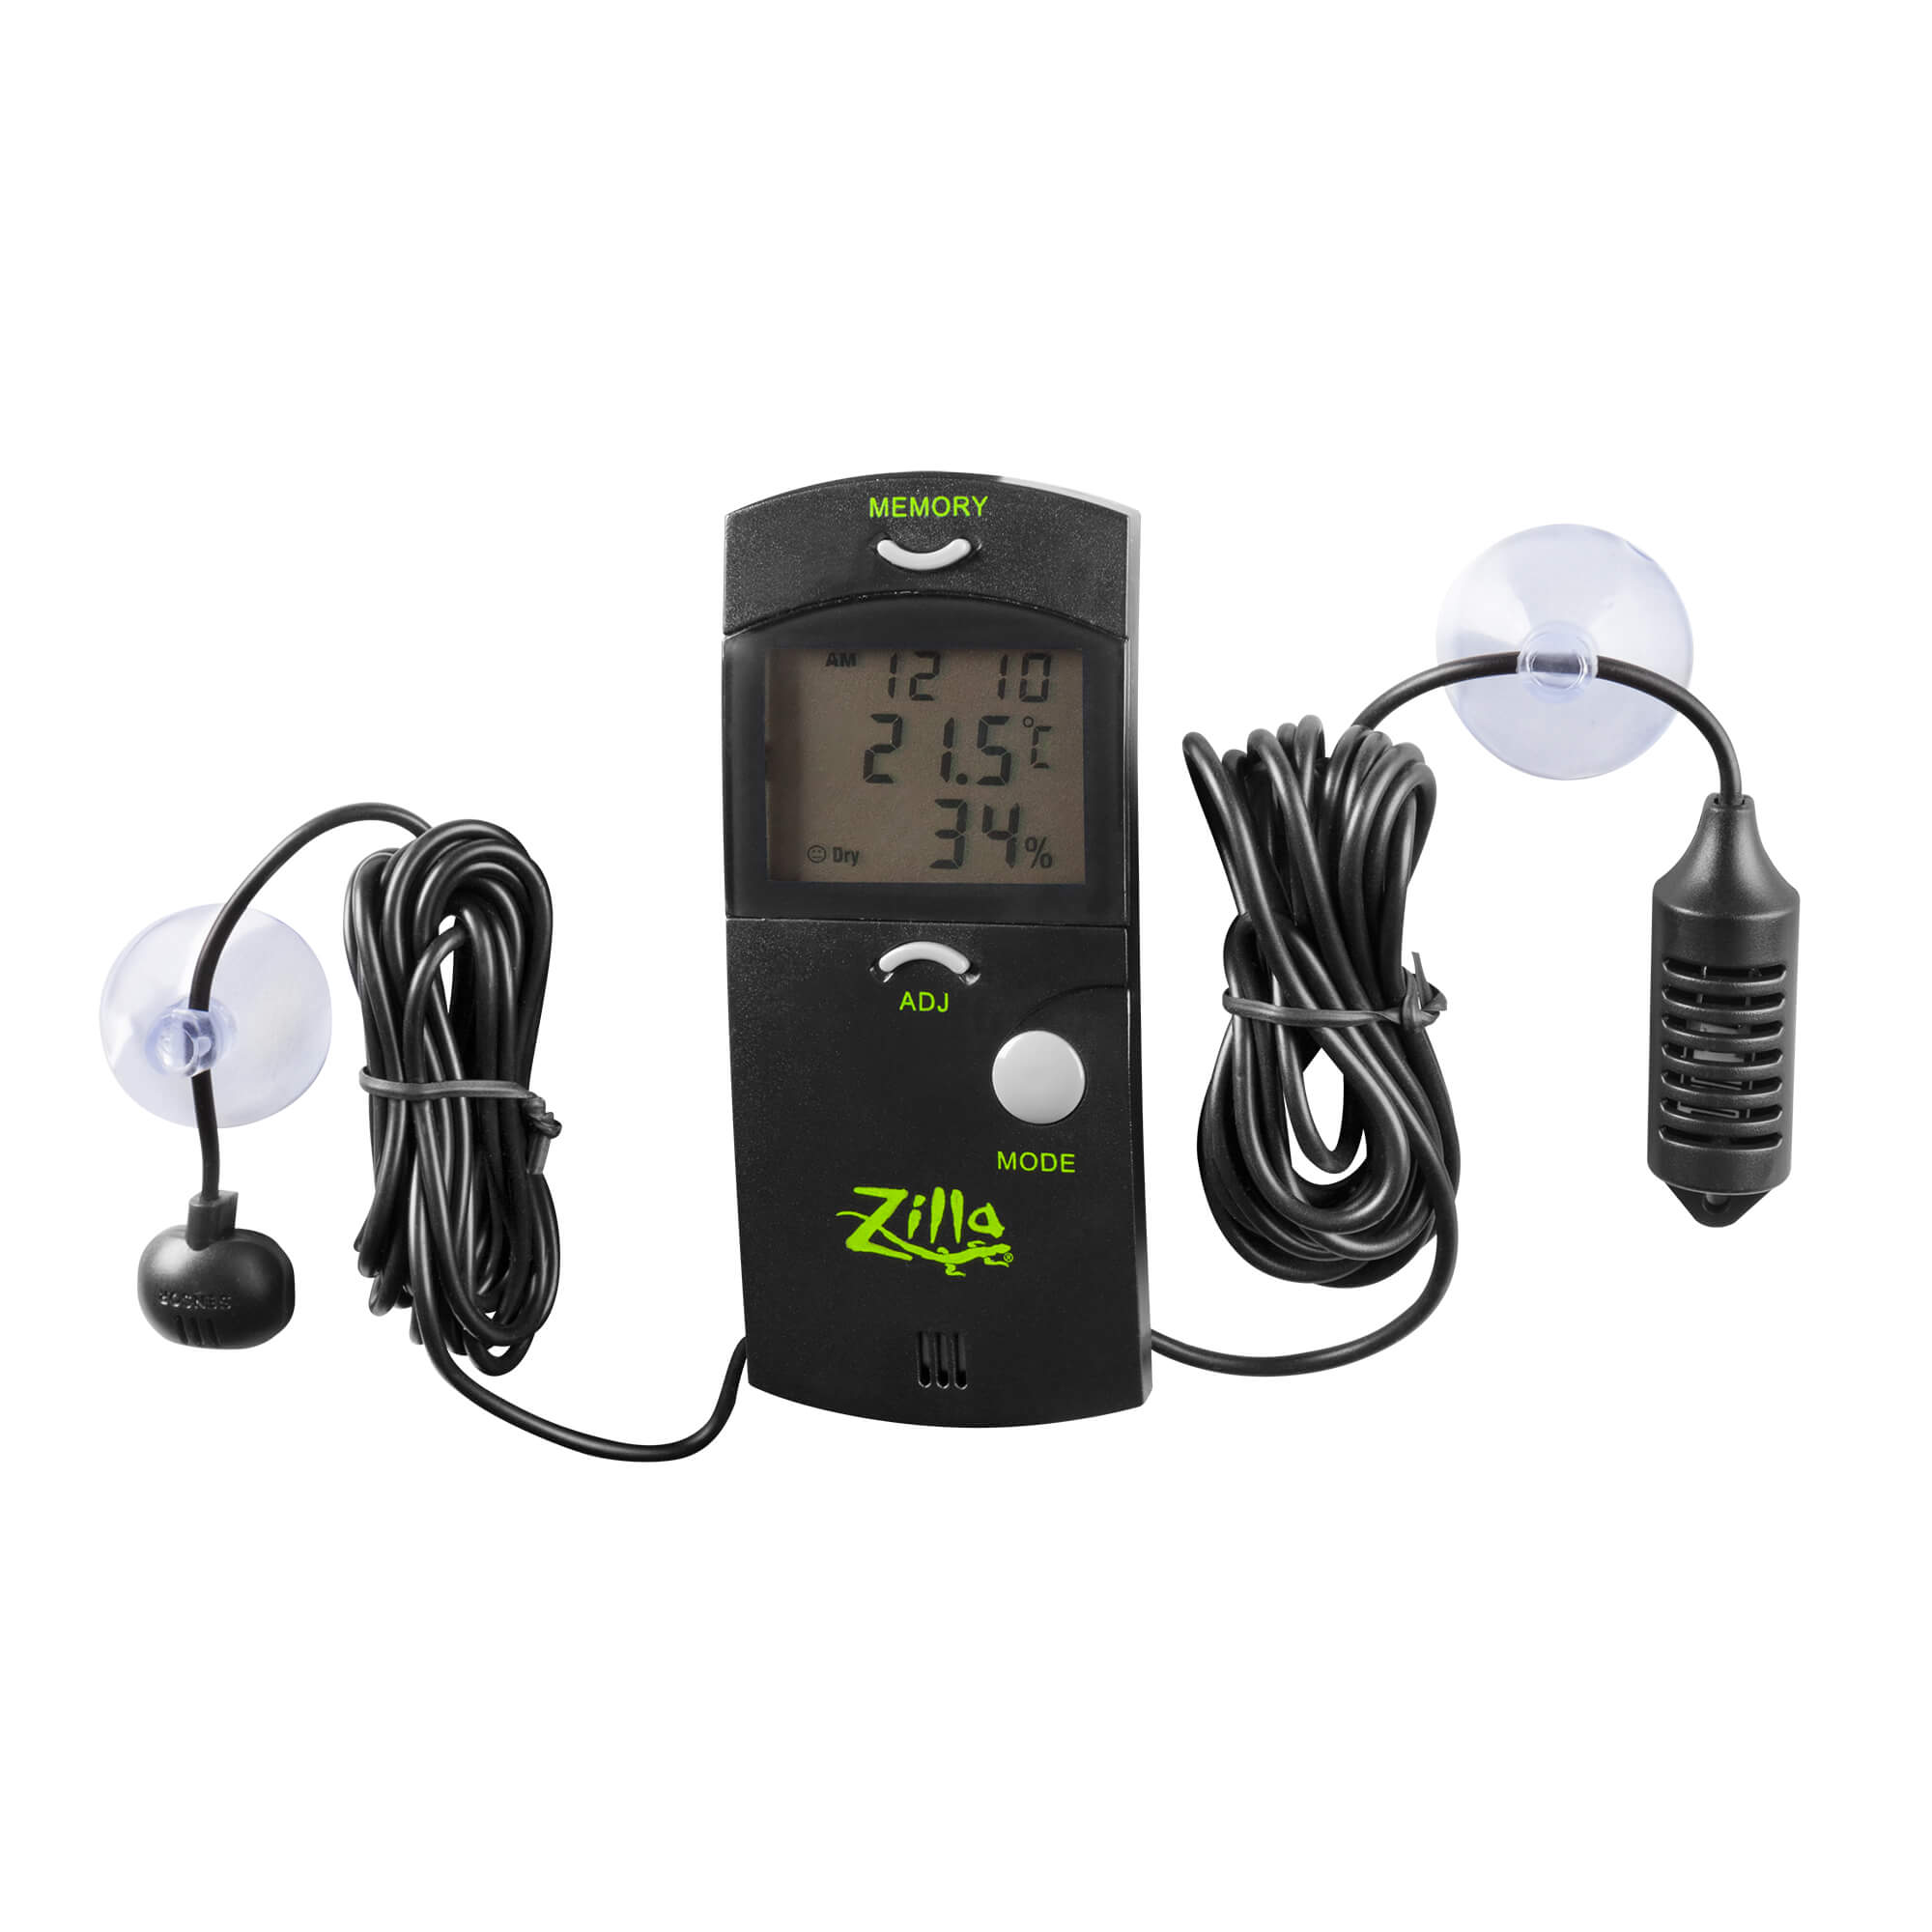 https://www.zillarules.com/-/media/project/oneweb/zilla/images/products-homepage/product-images/environmental-control/terrariumthermometerhygrometer/096316680289pt01.jpg?h=2000&iar=0&w=2000&hash=980E34E8757C2EDA204D794BBCB6D0A6